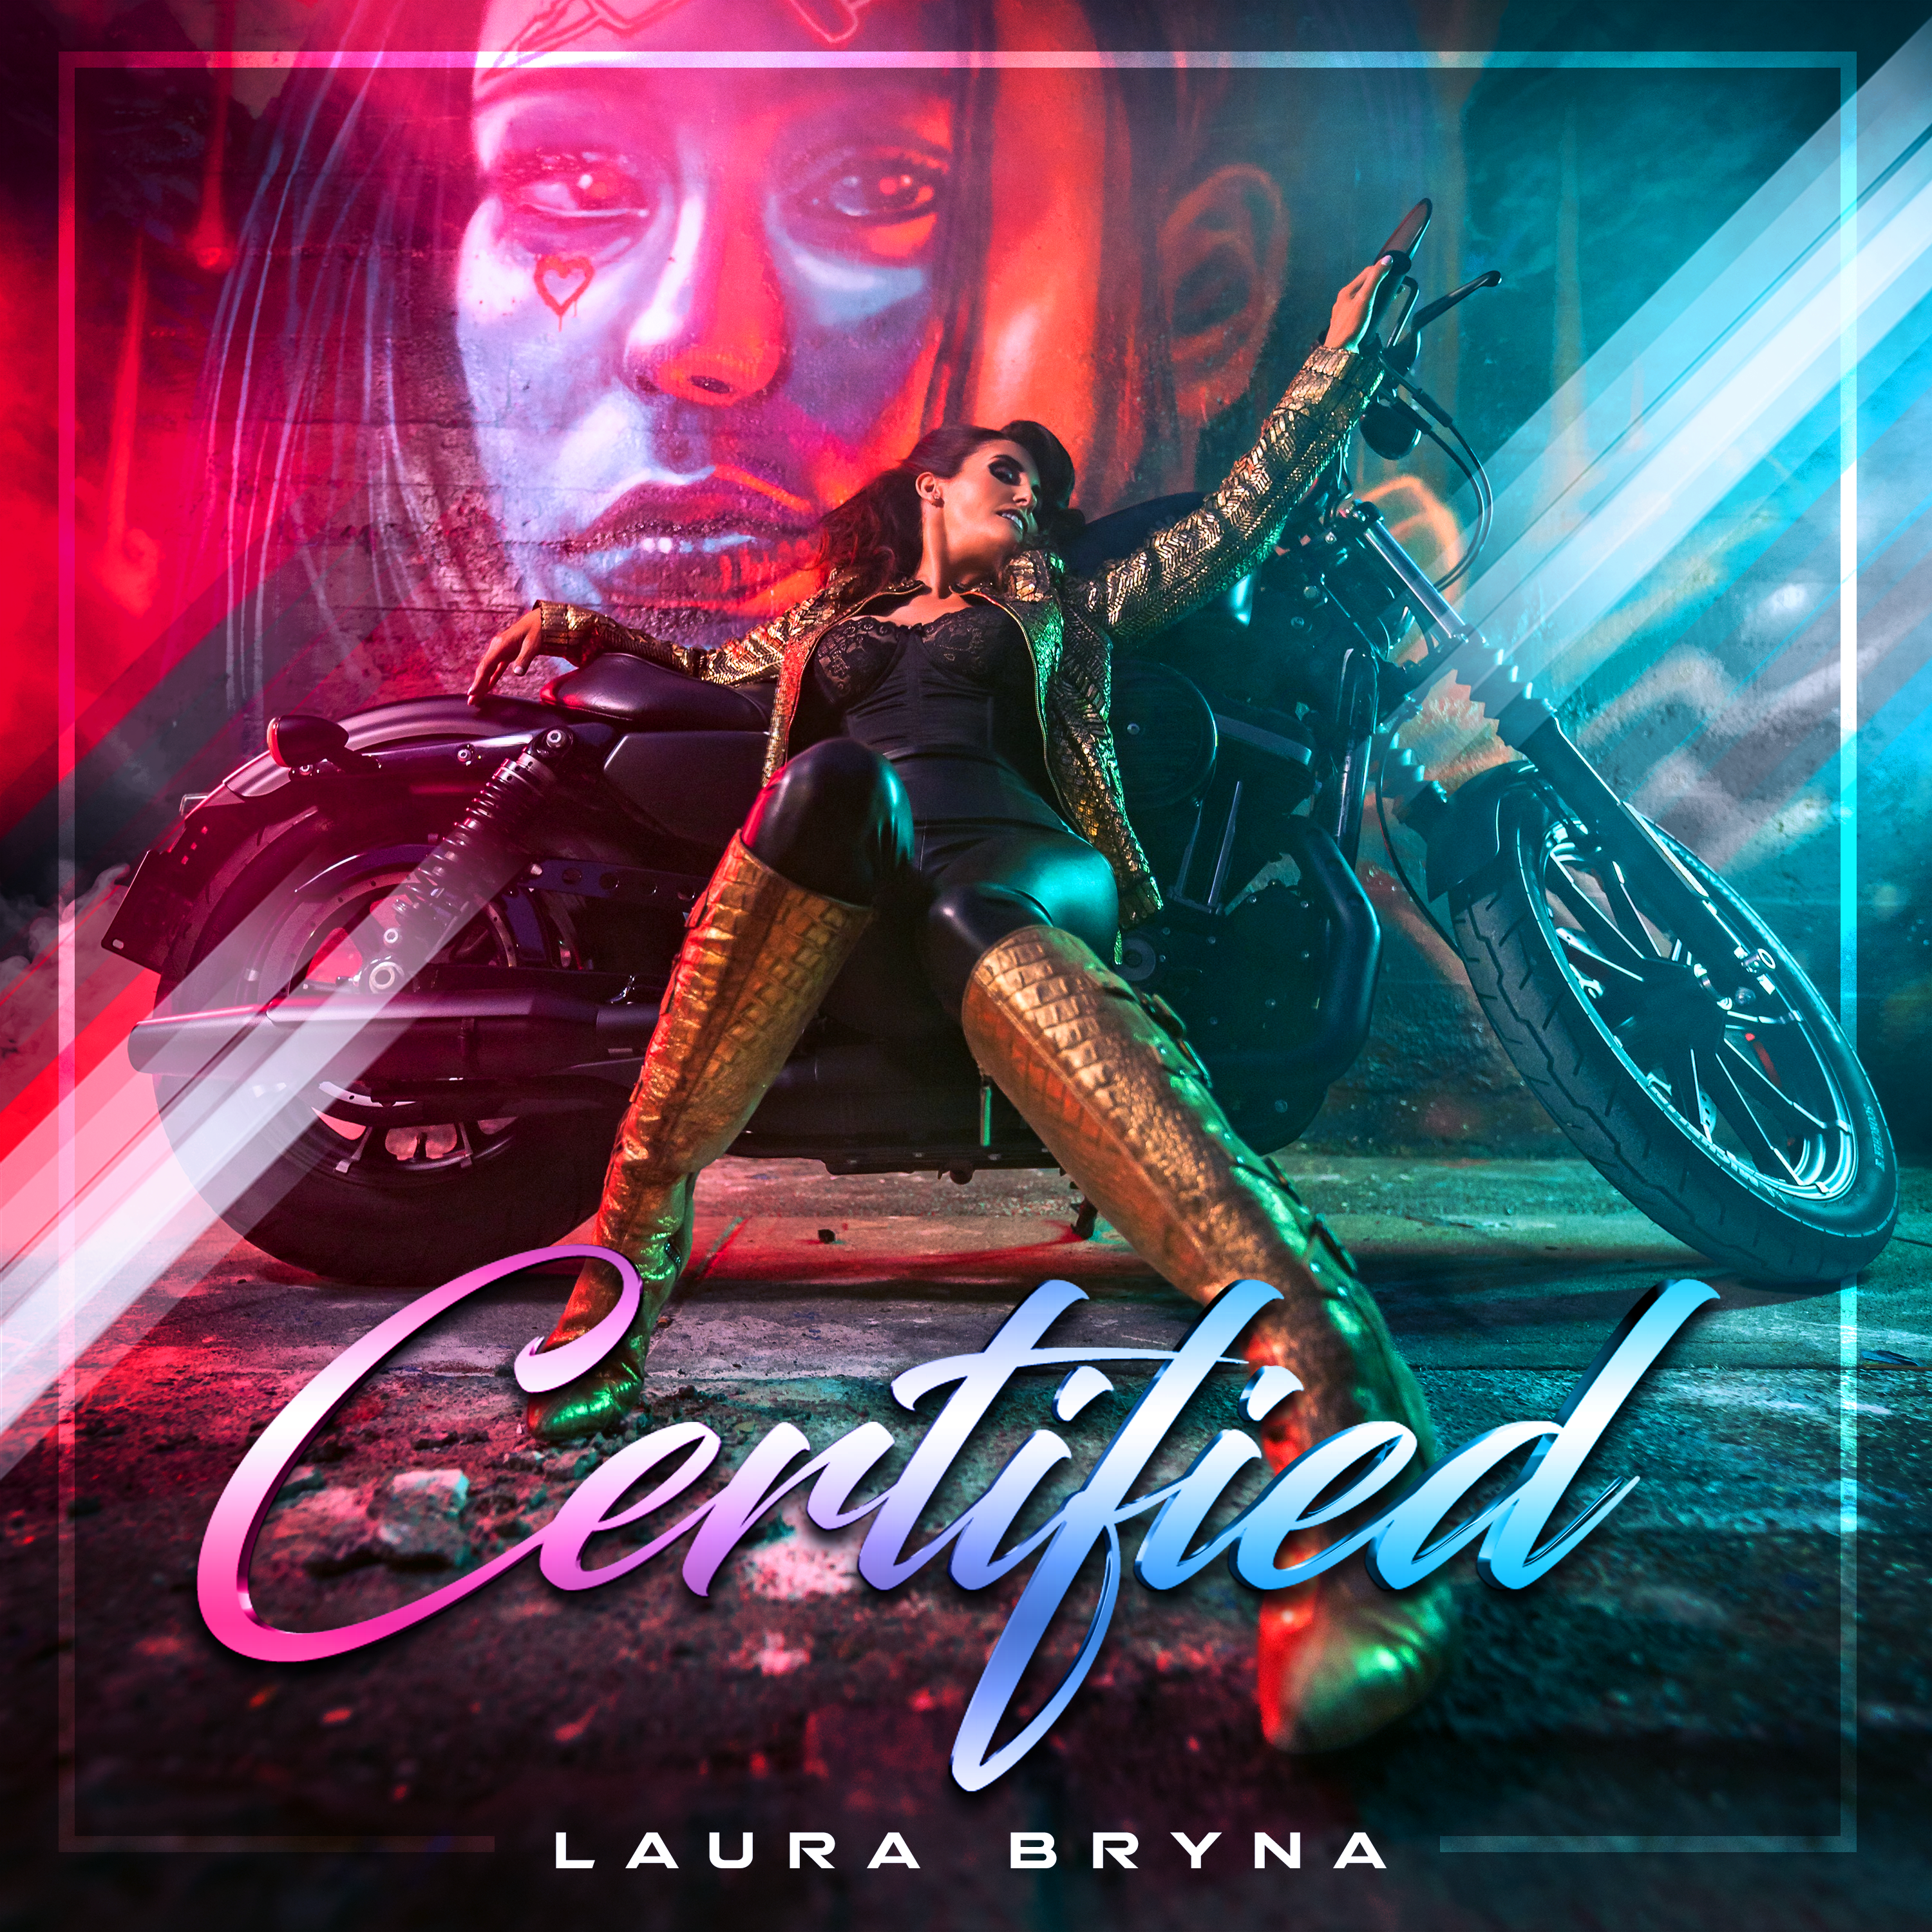 Laura Bryna Gives A New Meaning to Loud and Proud with New Single “Certified” (Premiere)